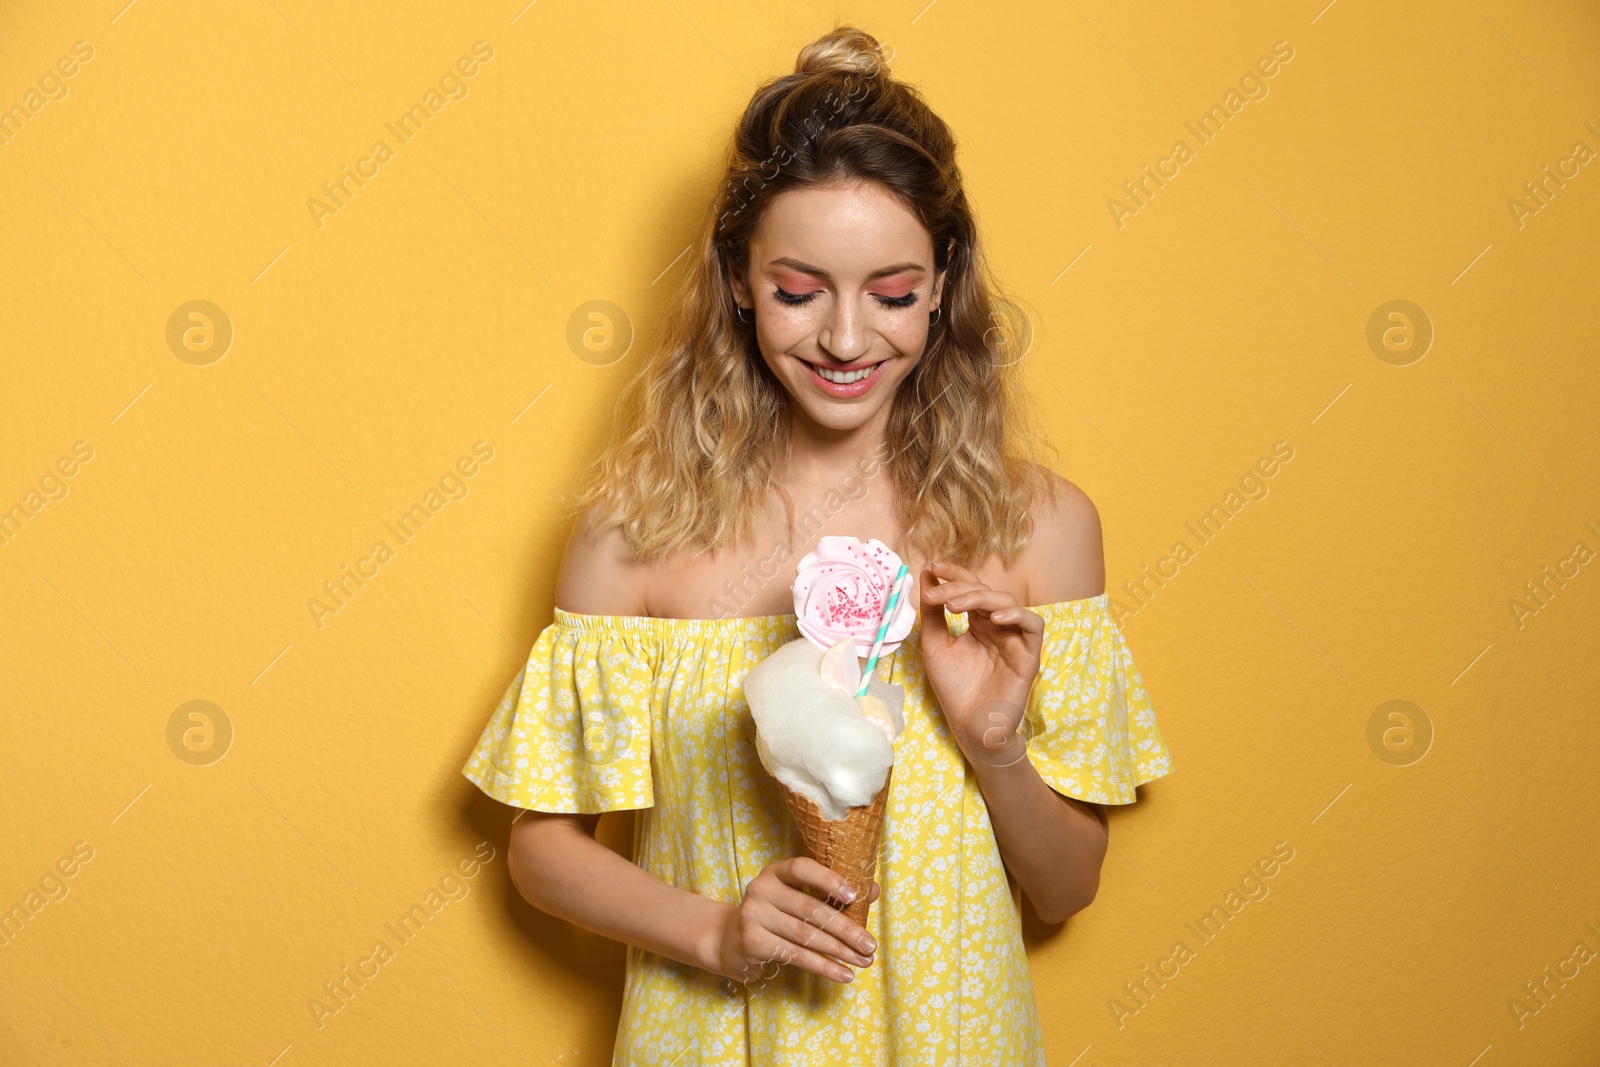 Photo of Portrait of young woman holding cotton candy dessert on yellow background